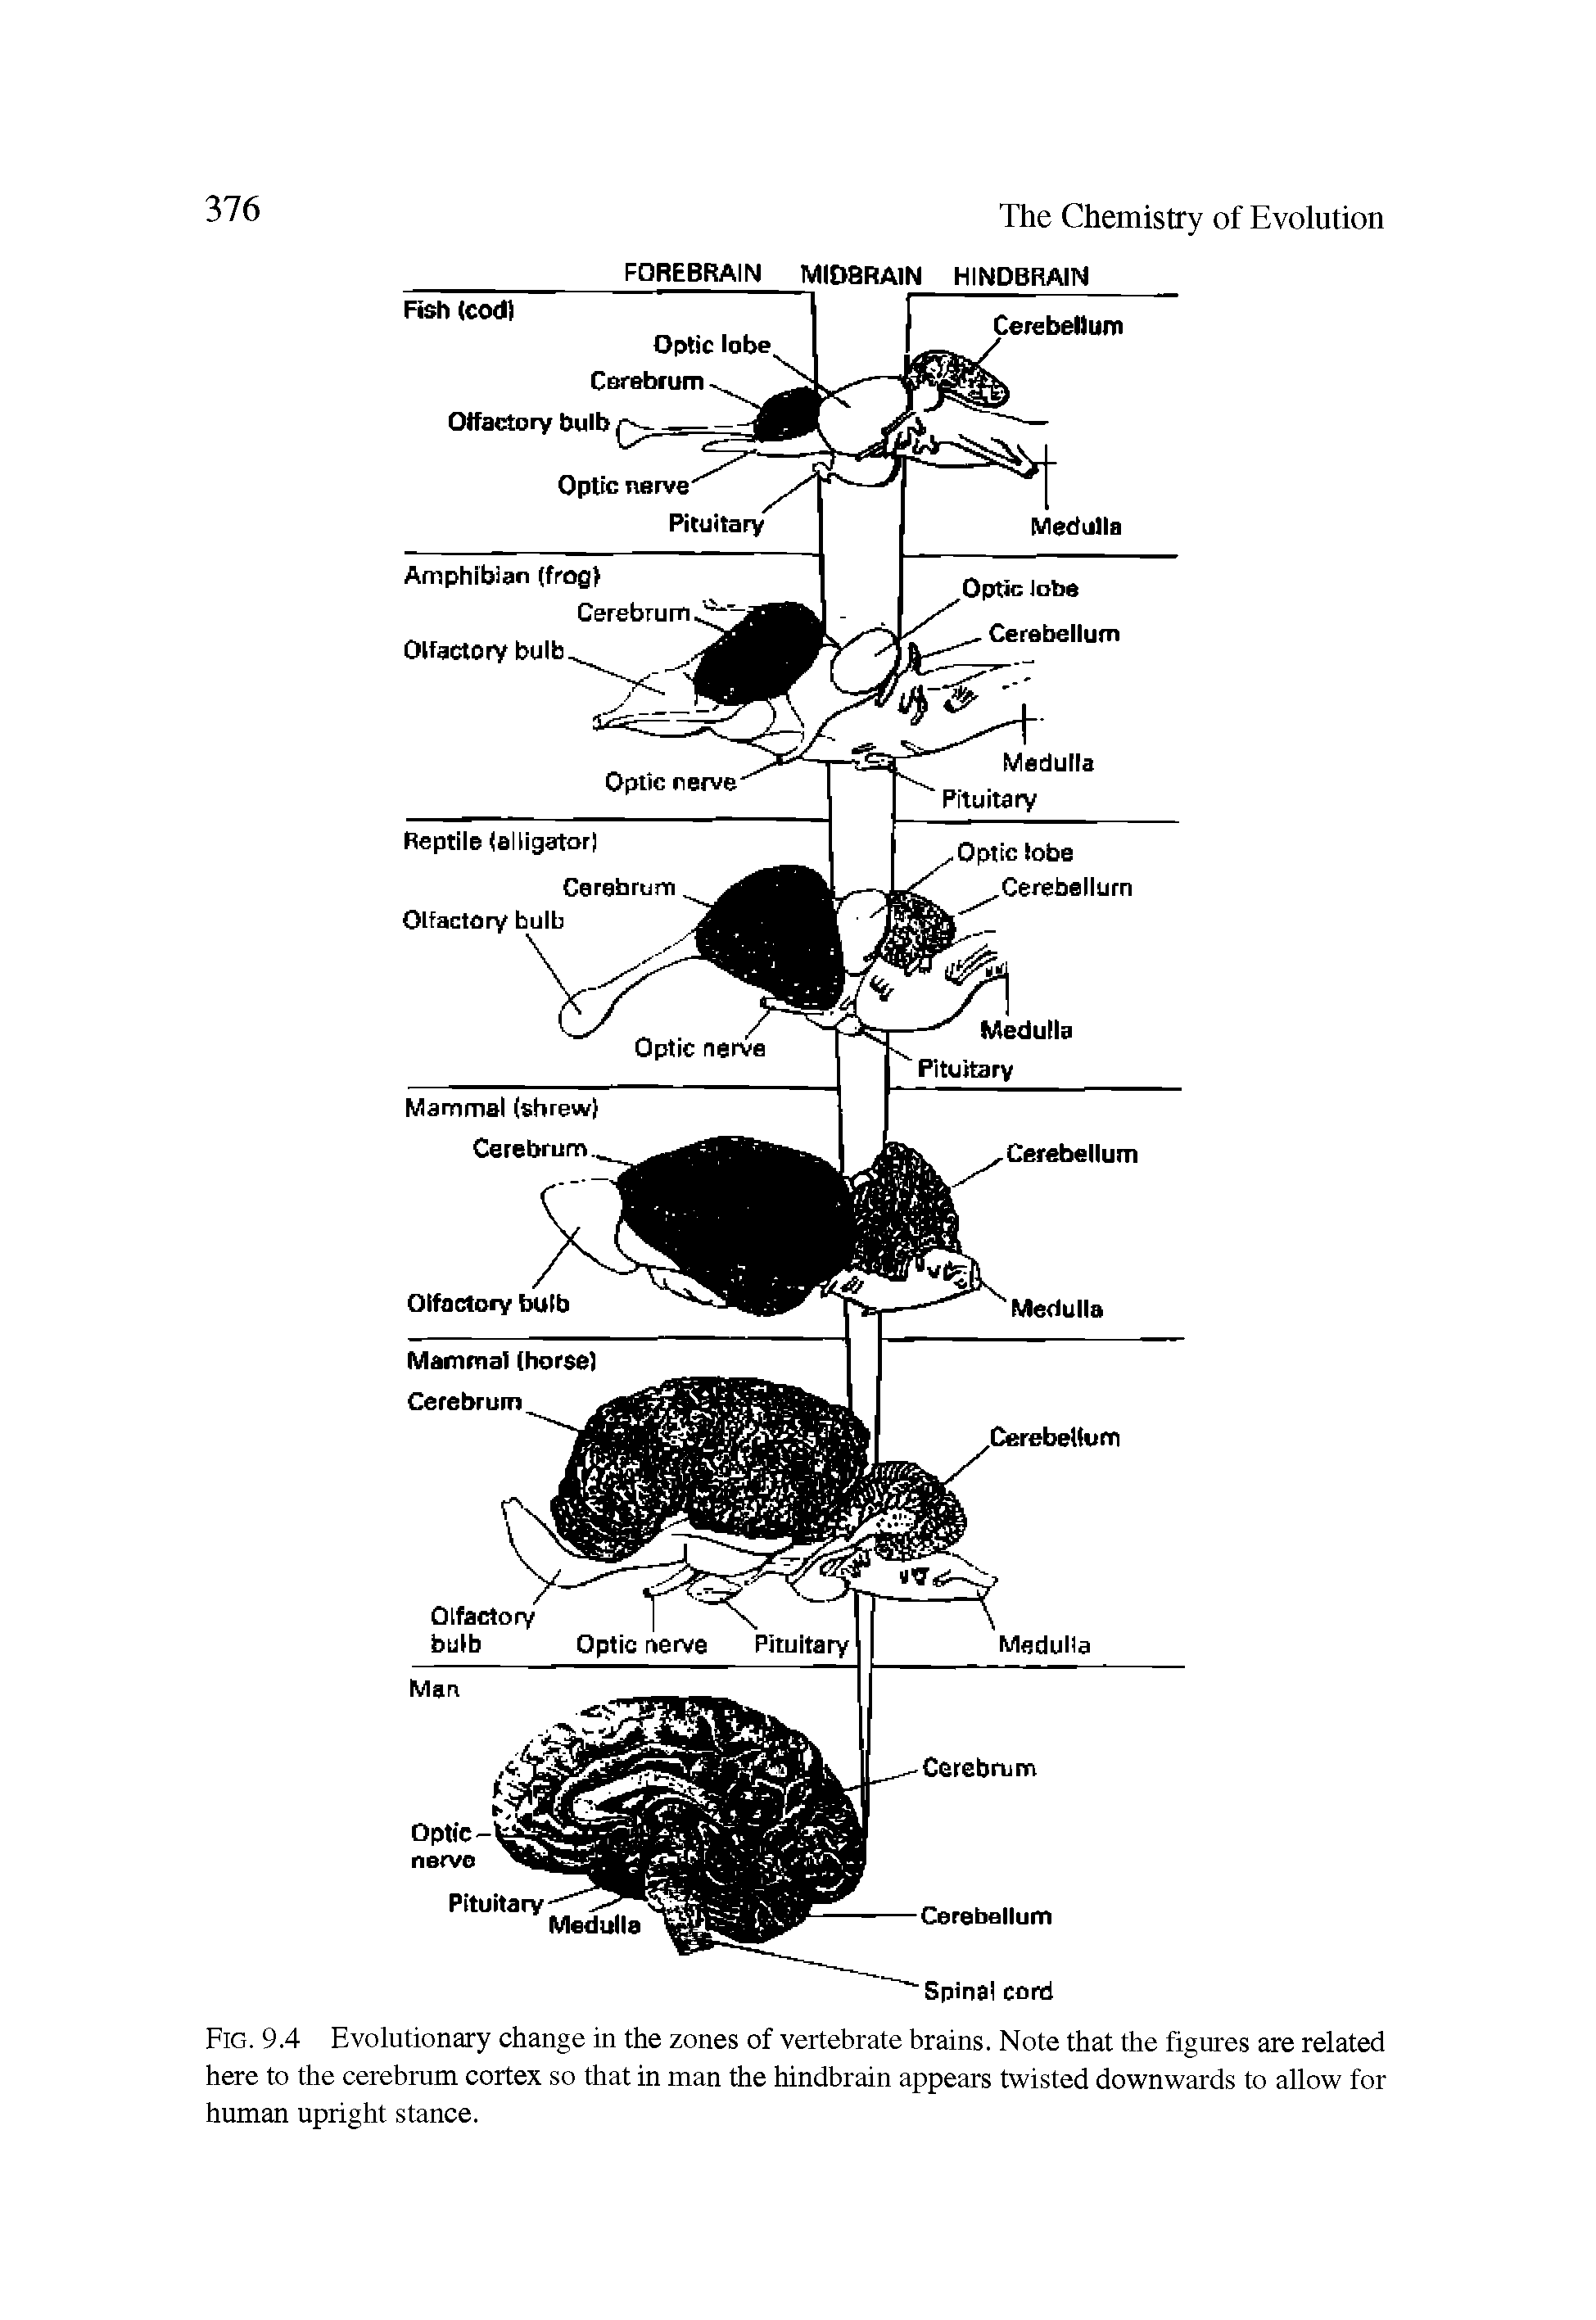 Fig. 9.4 Evolutionary change in the zones of vertebrate brains. Note that the figures are related here to the cerebrum cortex so that in man the hindbrain appears twisted downwards to allow for human upright stance.